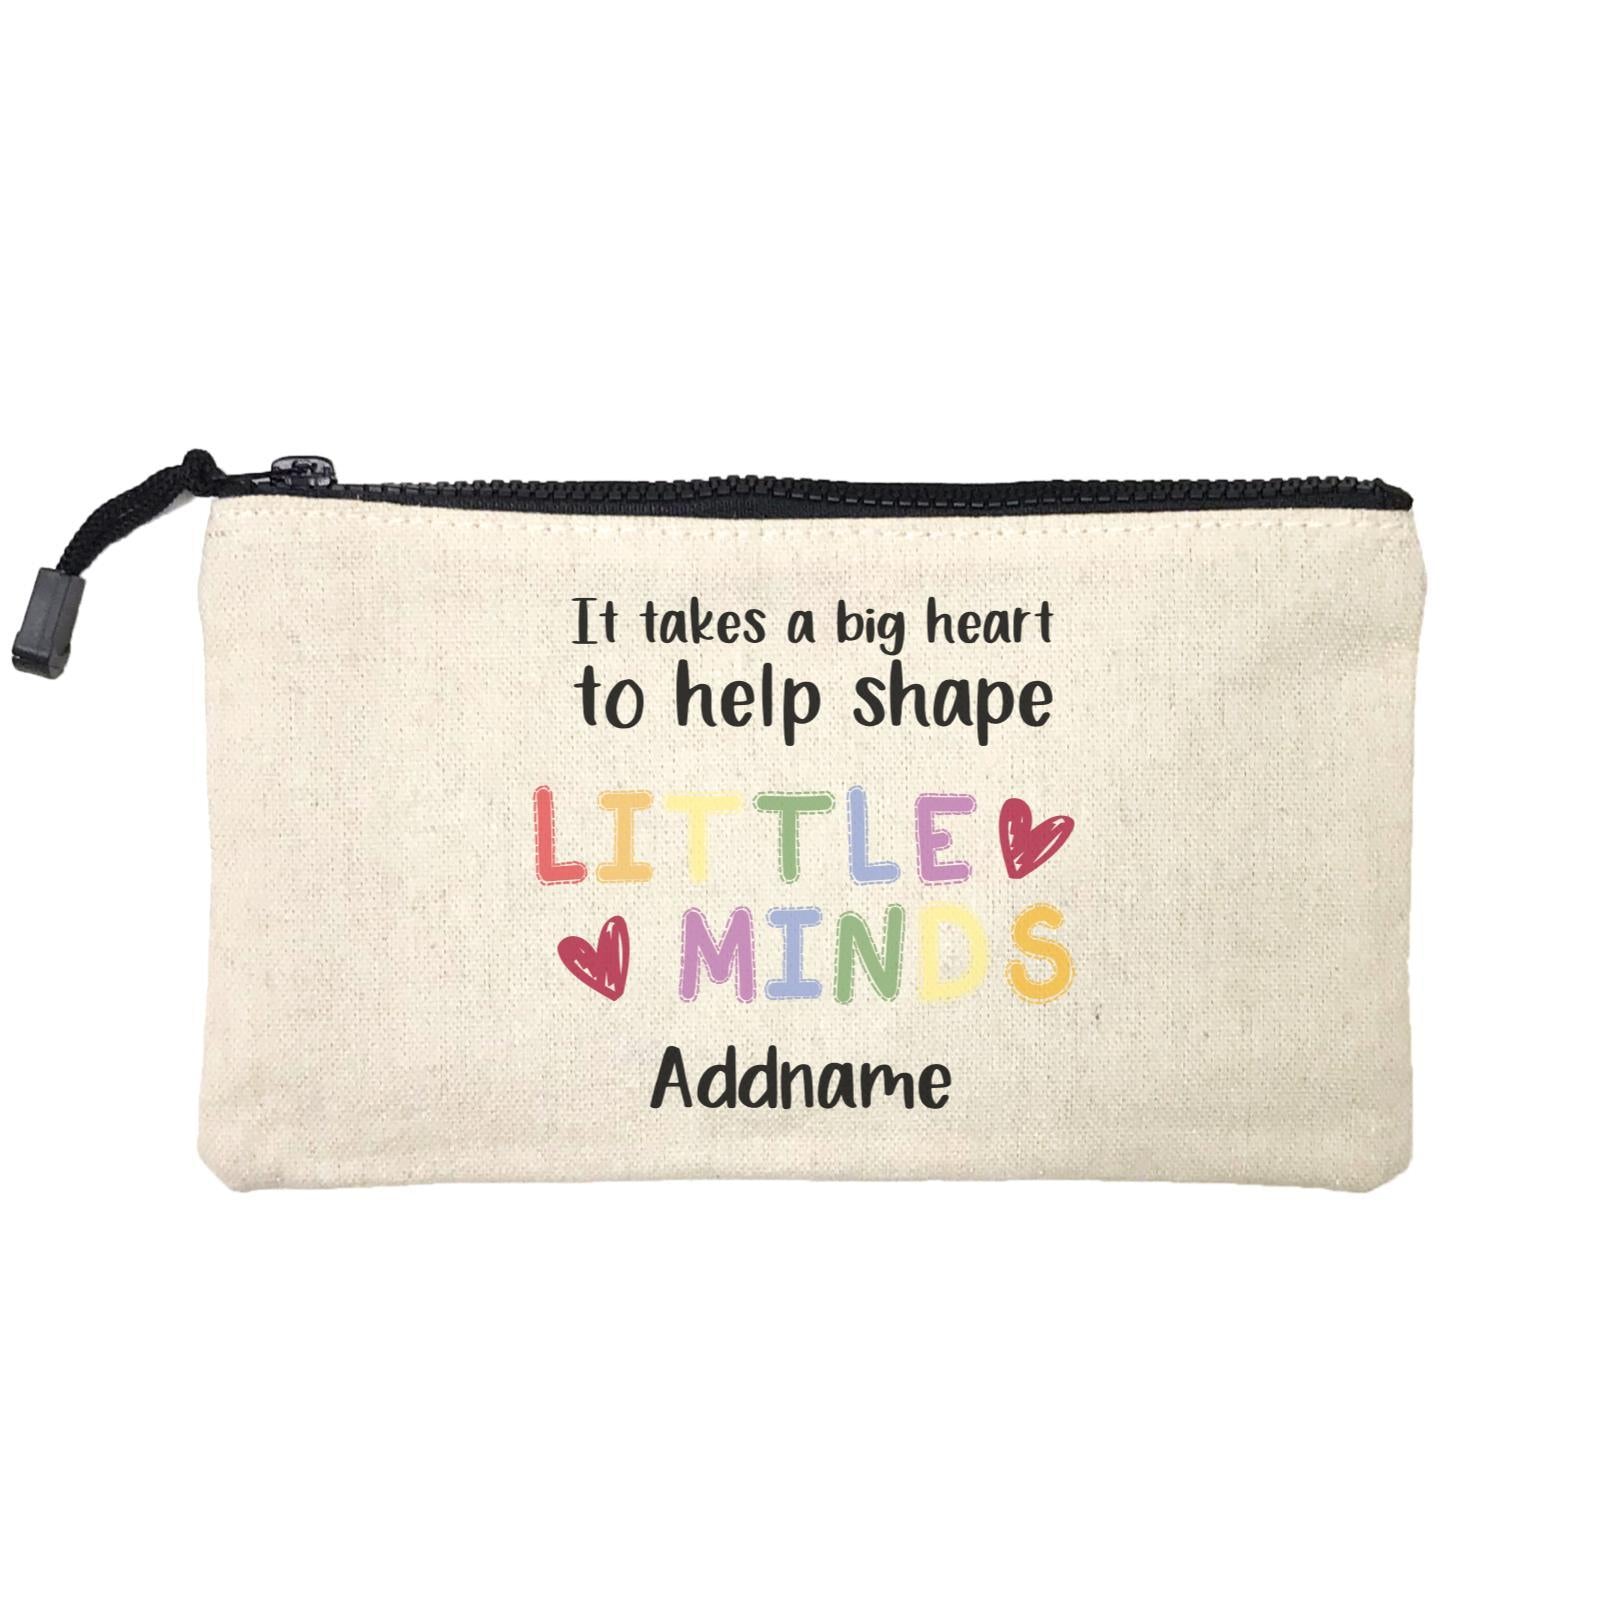 Teacher Quotes 2 It Takes A Big Heart To Help Shape Little Minds Addname Mini Accessories Stationery Pouch